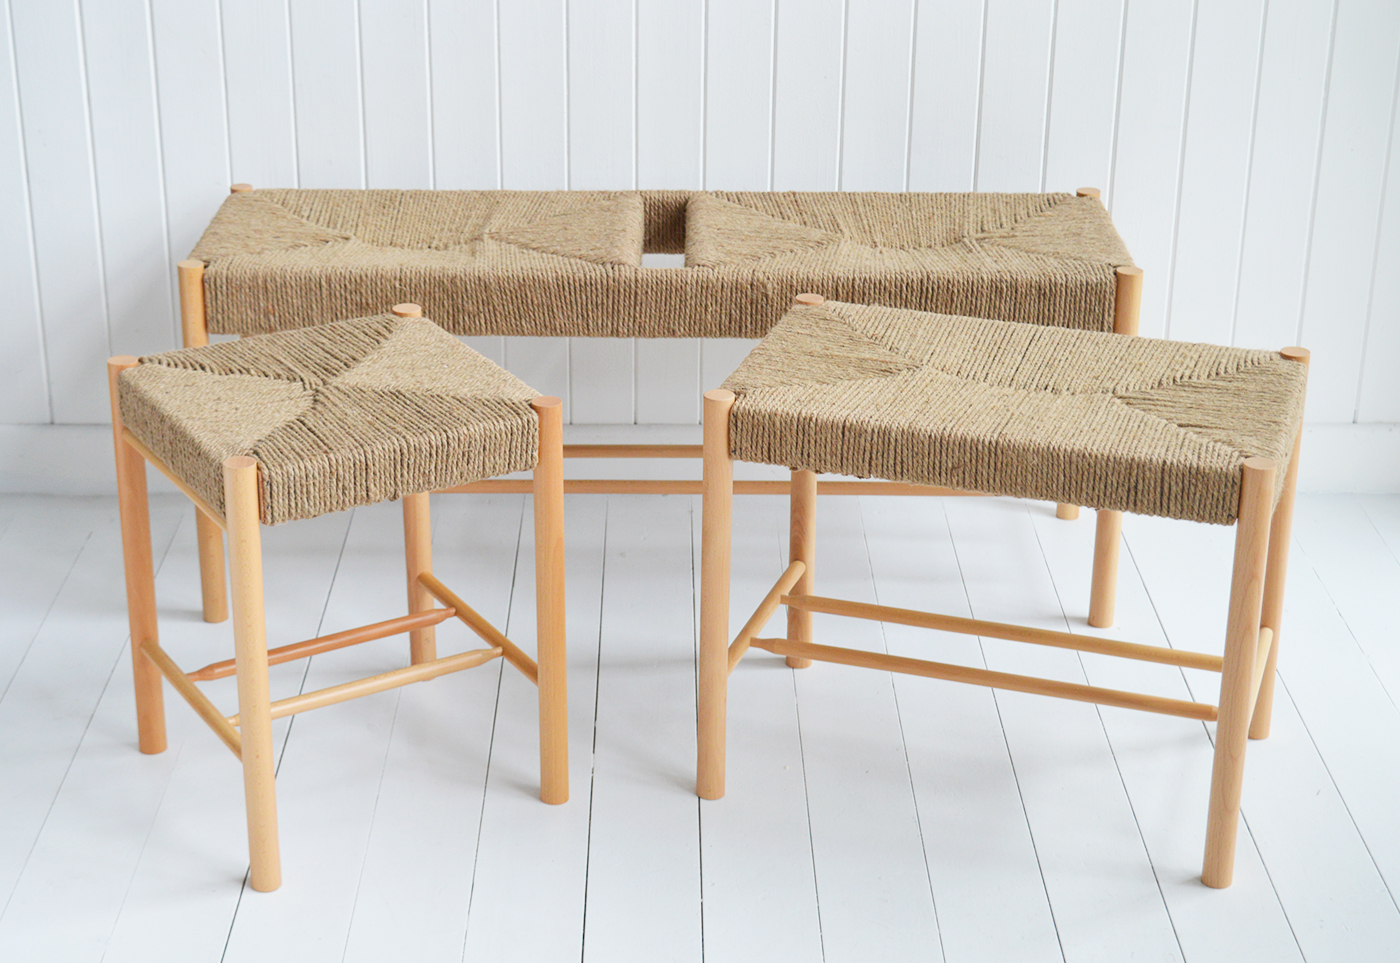 Wakefield Woven Wooden Benches - Bench and Stool for New England modern farmhouse, country and coastal furniture and interiors